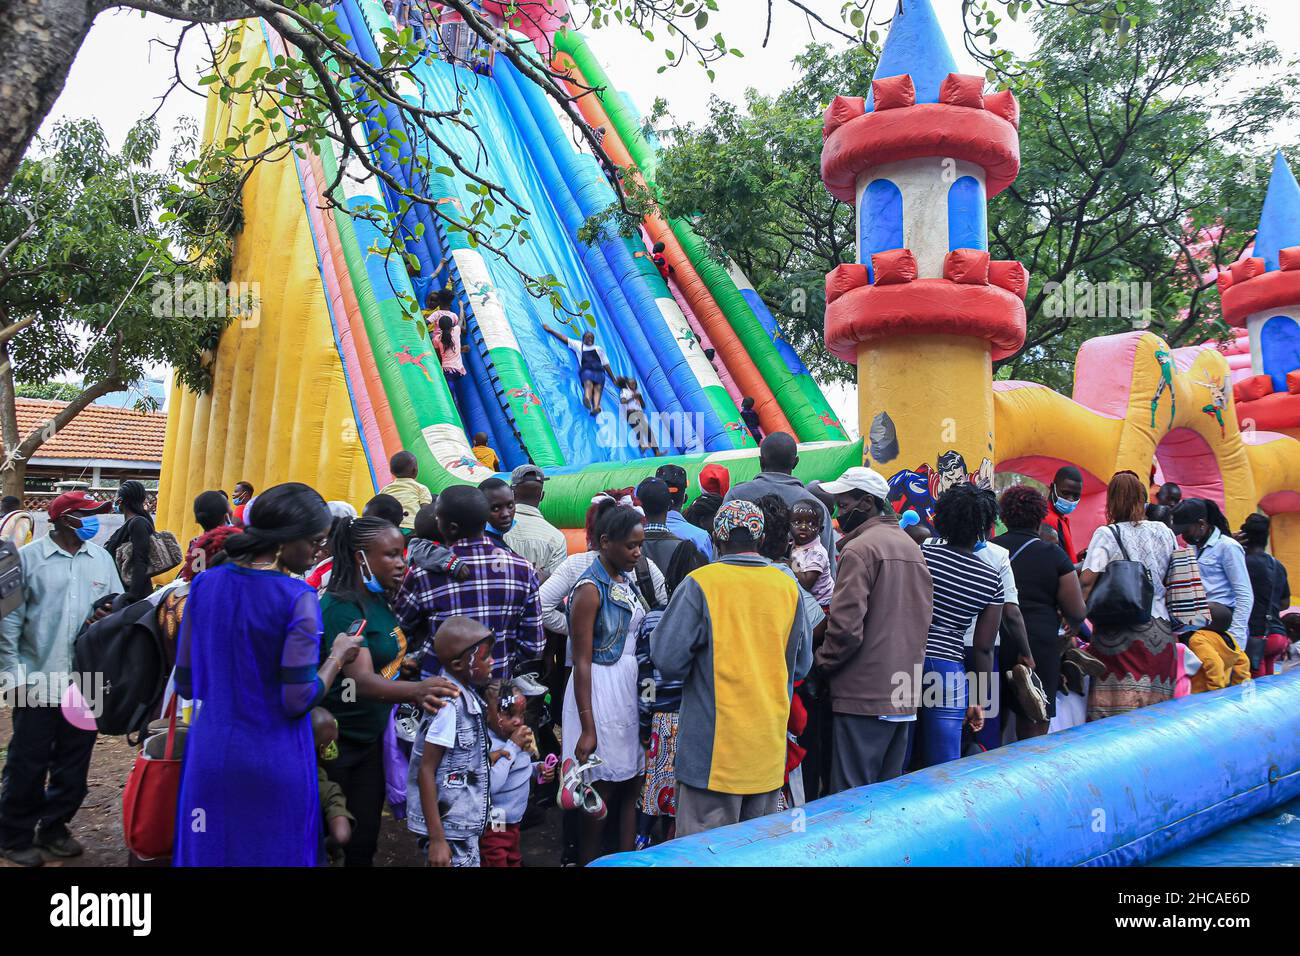 Nairobi, Kenya. 25th Dec, 2021. Kenyan families wait in queue for their children to get a chance to slide on a bouncing castle at a carnival on Christmas Day. For many years, Kenyans living in Nairobi and its environs have spent Christmas Day at the Uhuru and Central parks. However, that is not the case this year, as the two parks remain closed for renovations. This did not stop them from enjoying the day in small spaces that were available. Credit: SOPA Images Limited/Alamy Live News Stock Photo